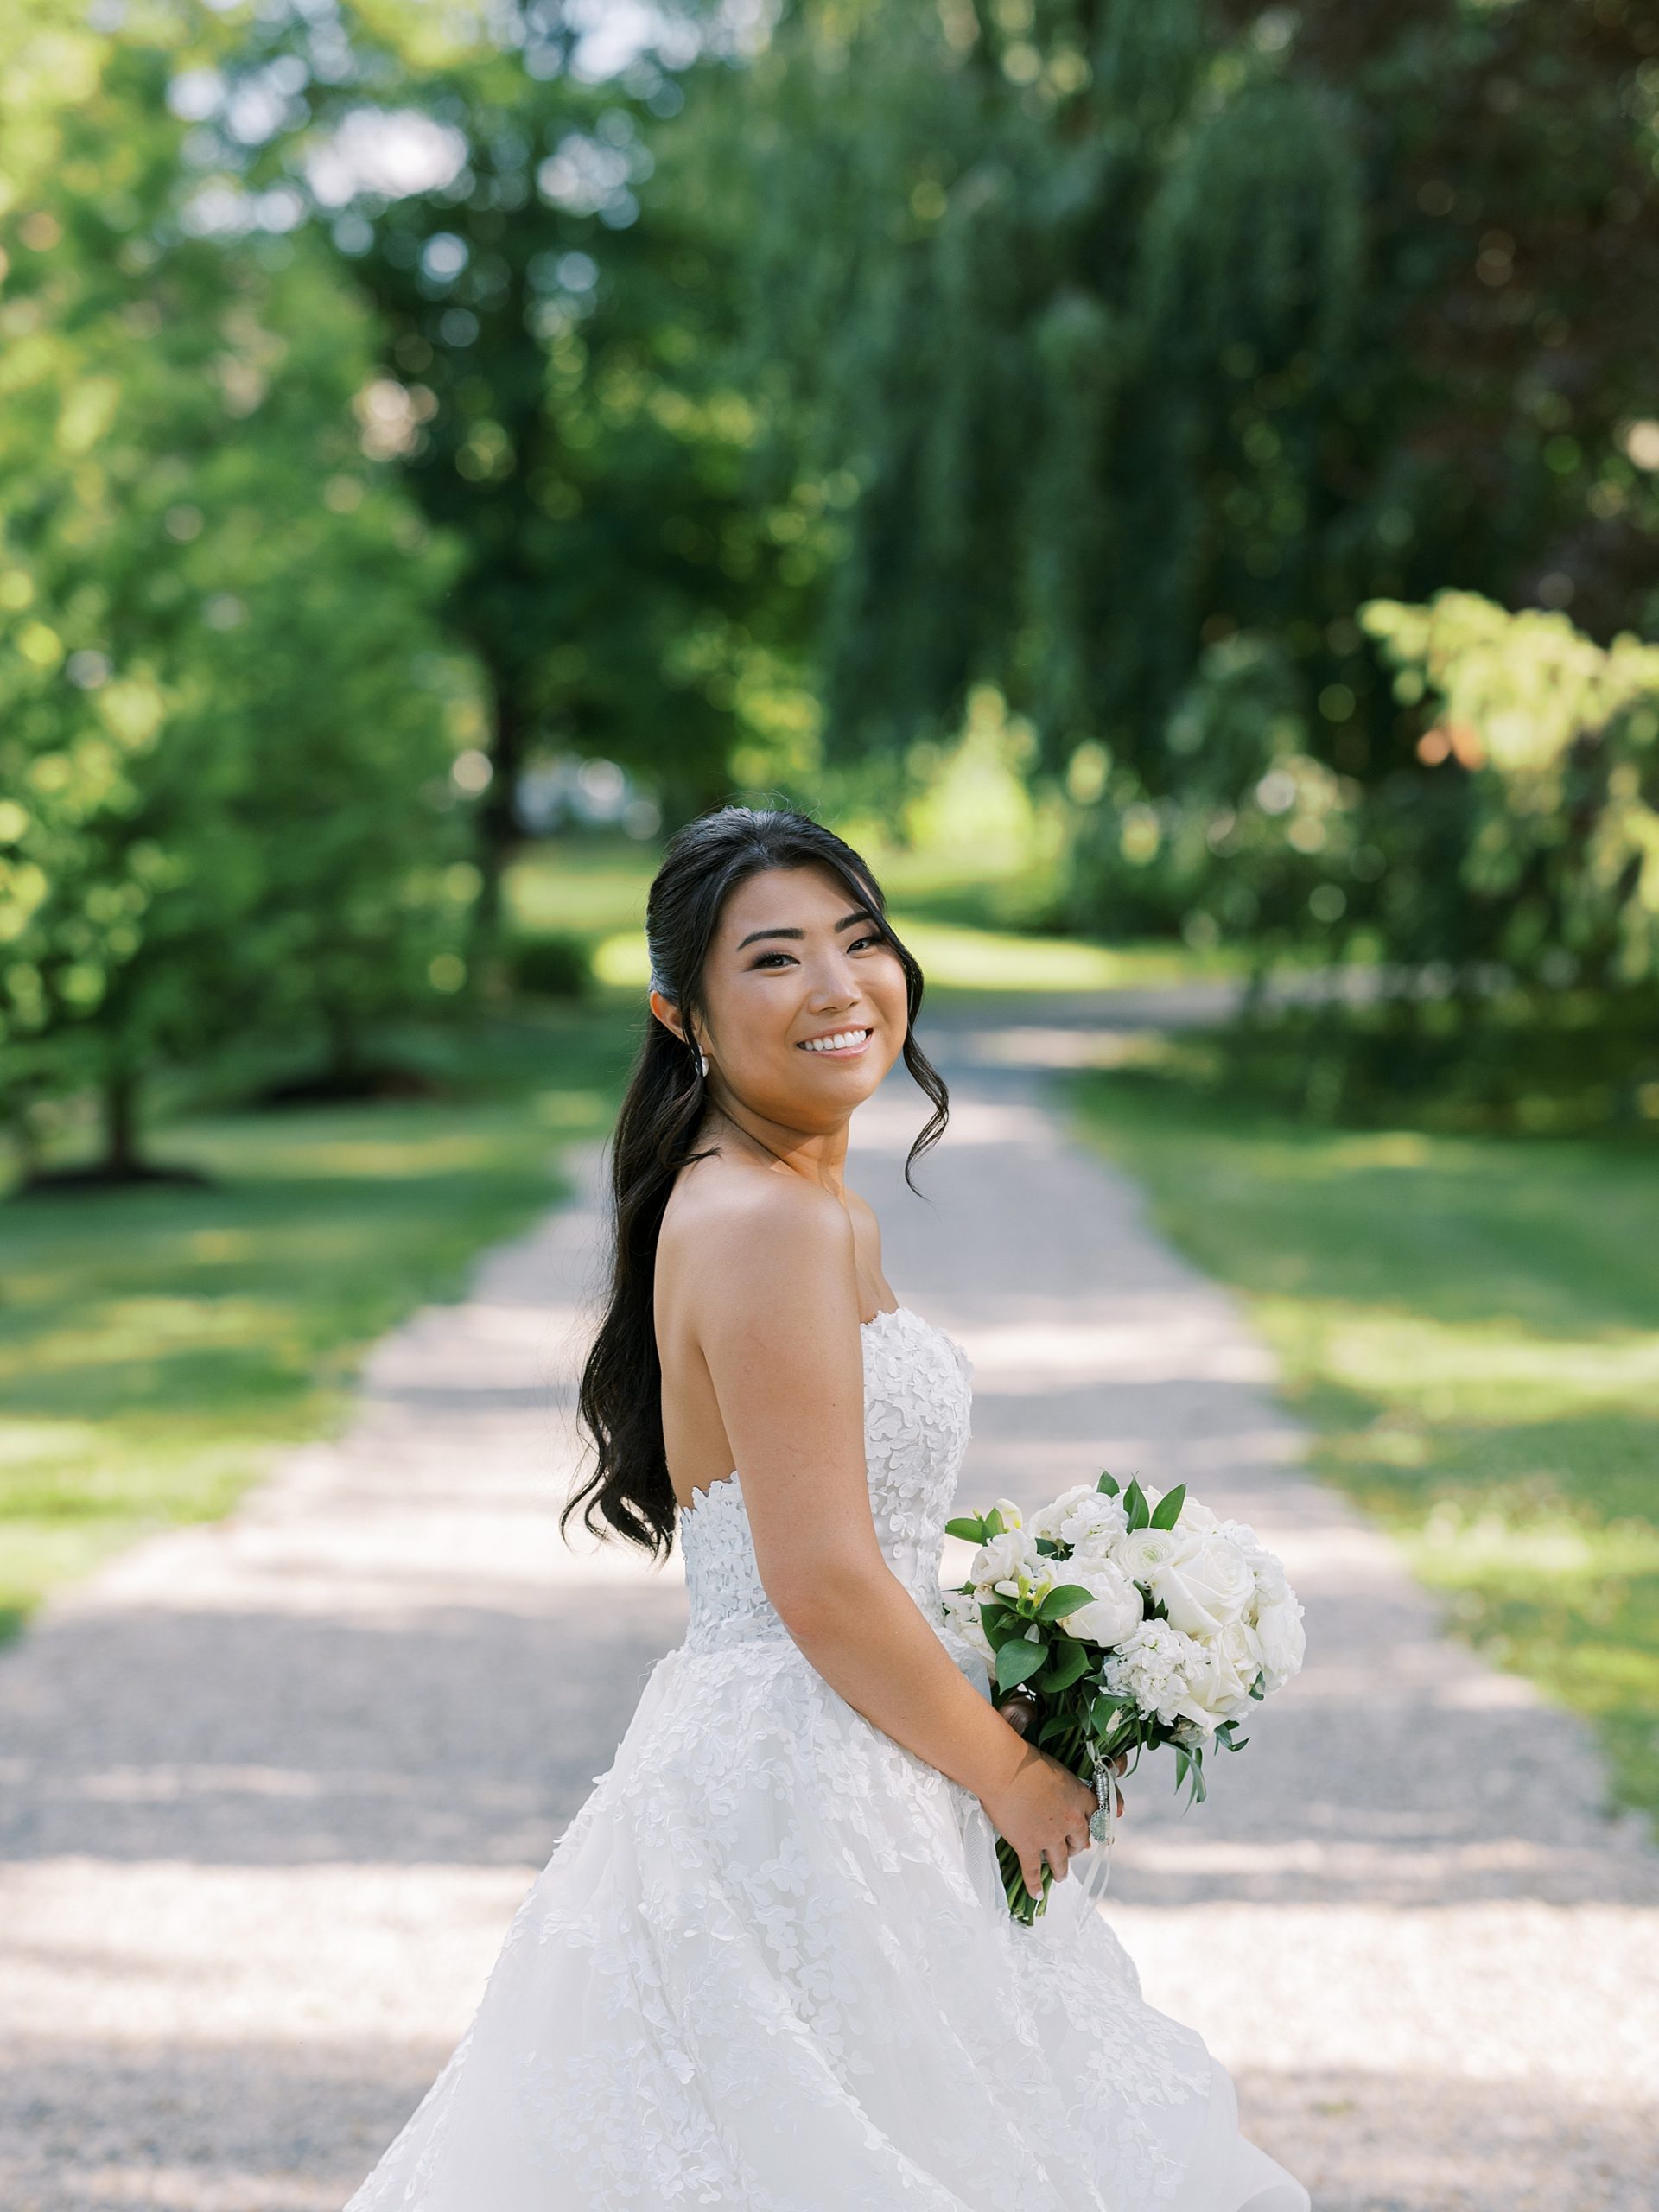 bride smiles looking over shoulder in wedding gown with small bouquet of white flowers